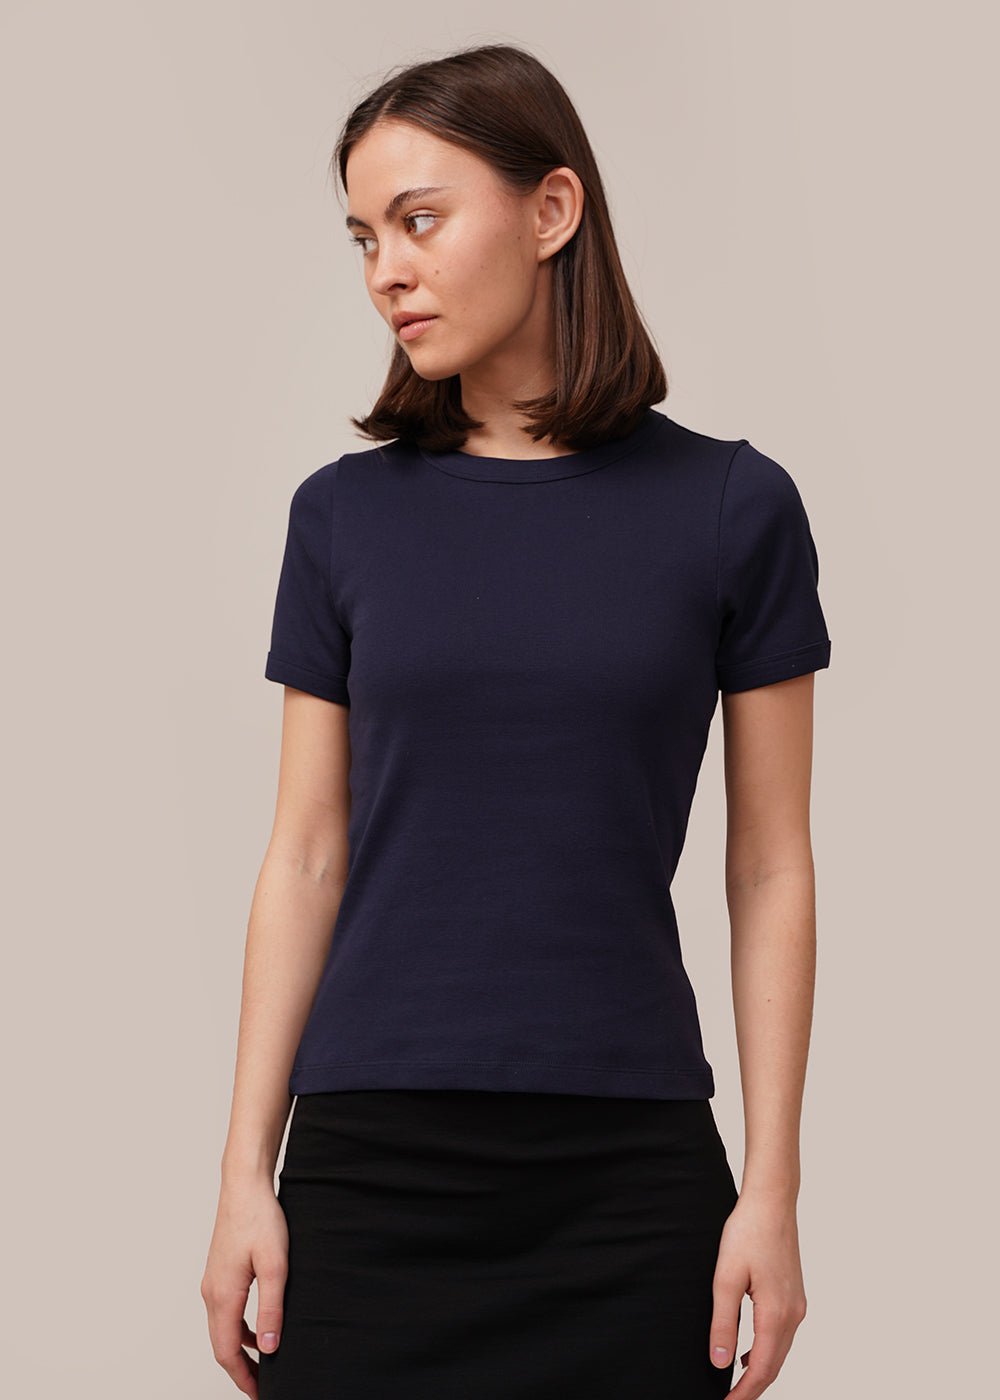 FLORE FLORE Navy Car Tee - New Classics Studios Sustainable Ethical Fashion Canada